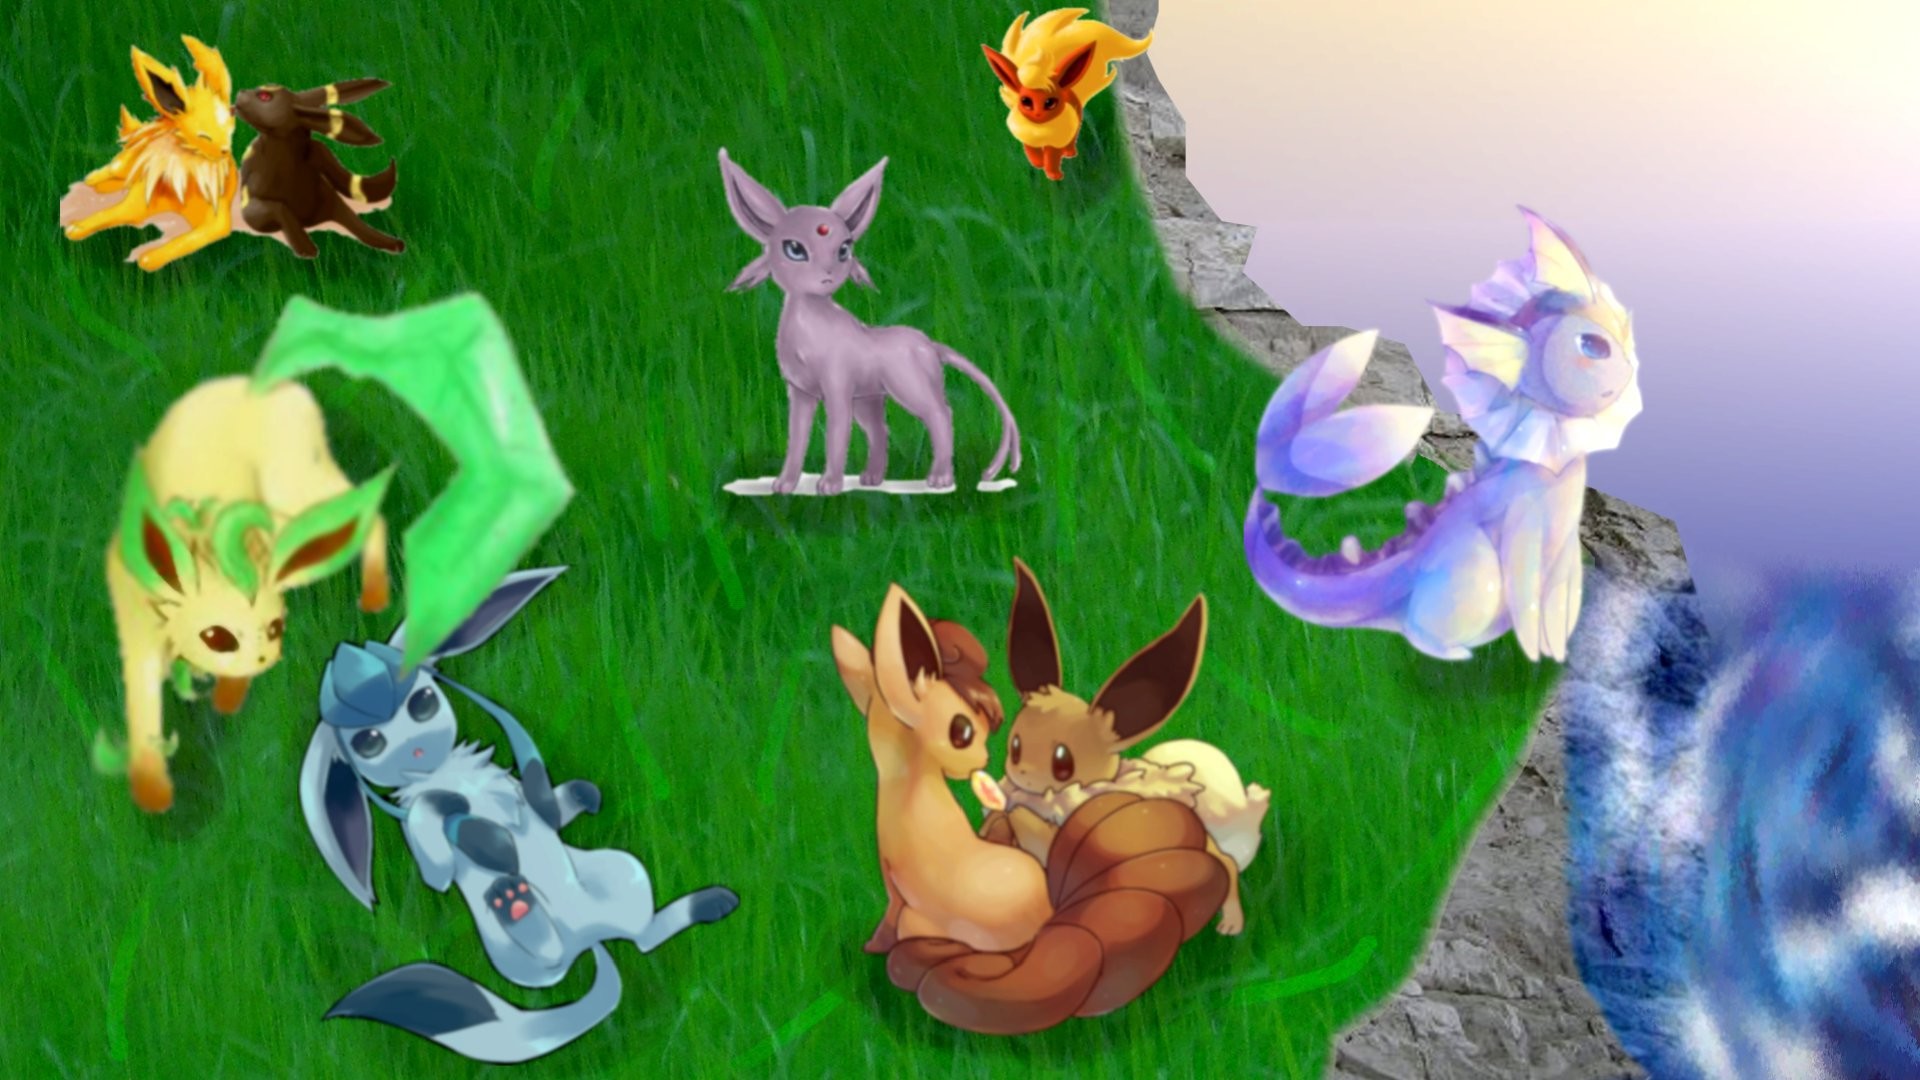 Eevee and his evolutions with Vulpix by Valyli